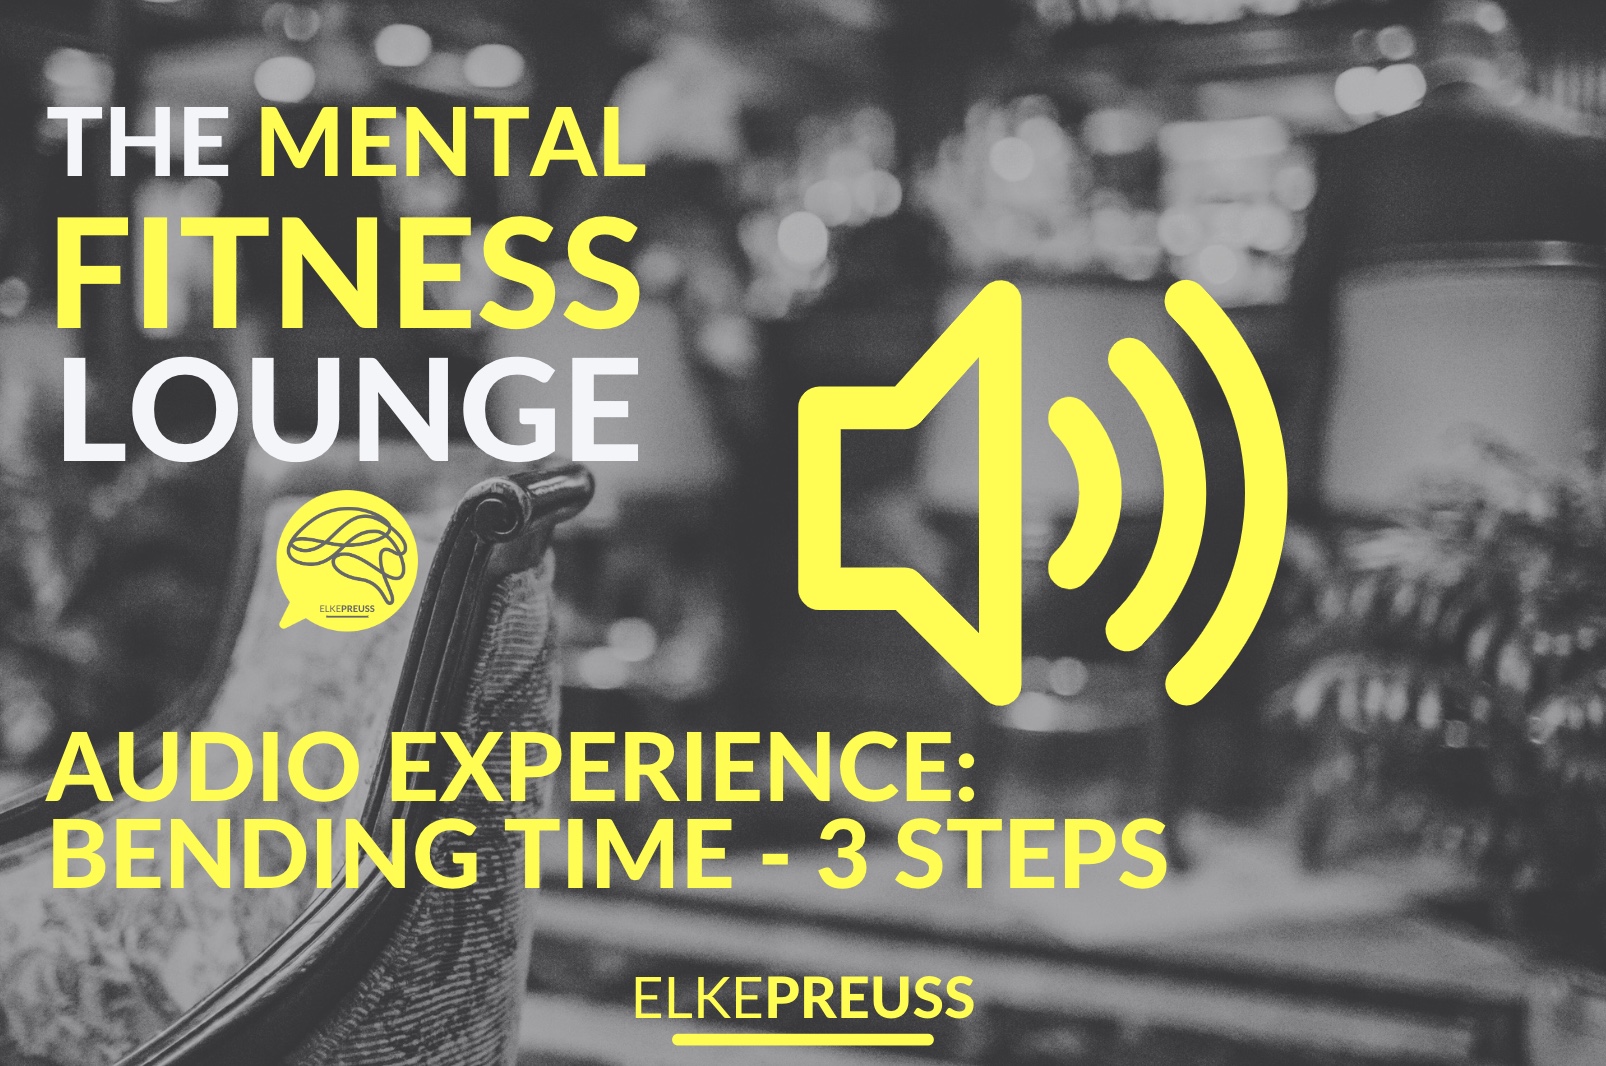 THE MENTAL FITNESS LOUNGE